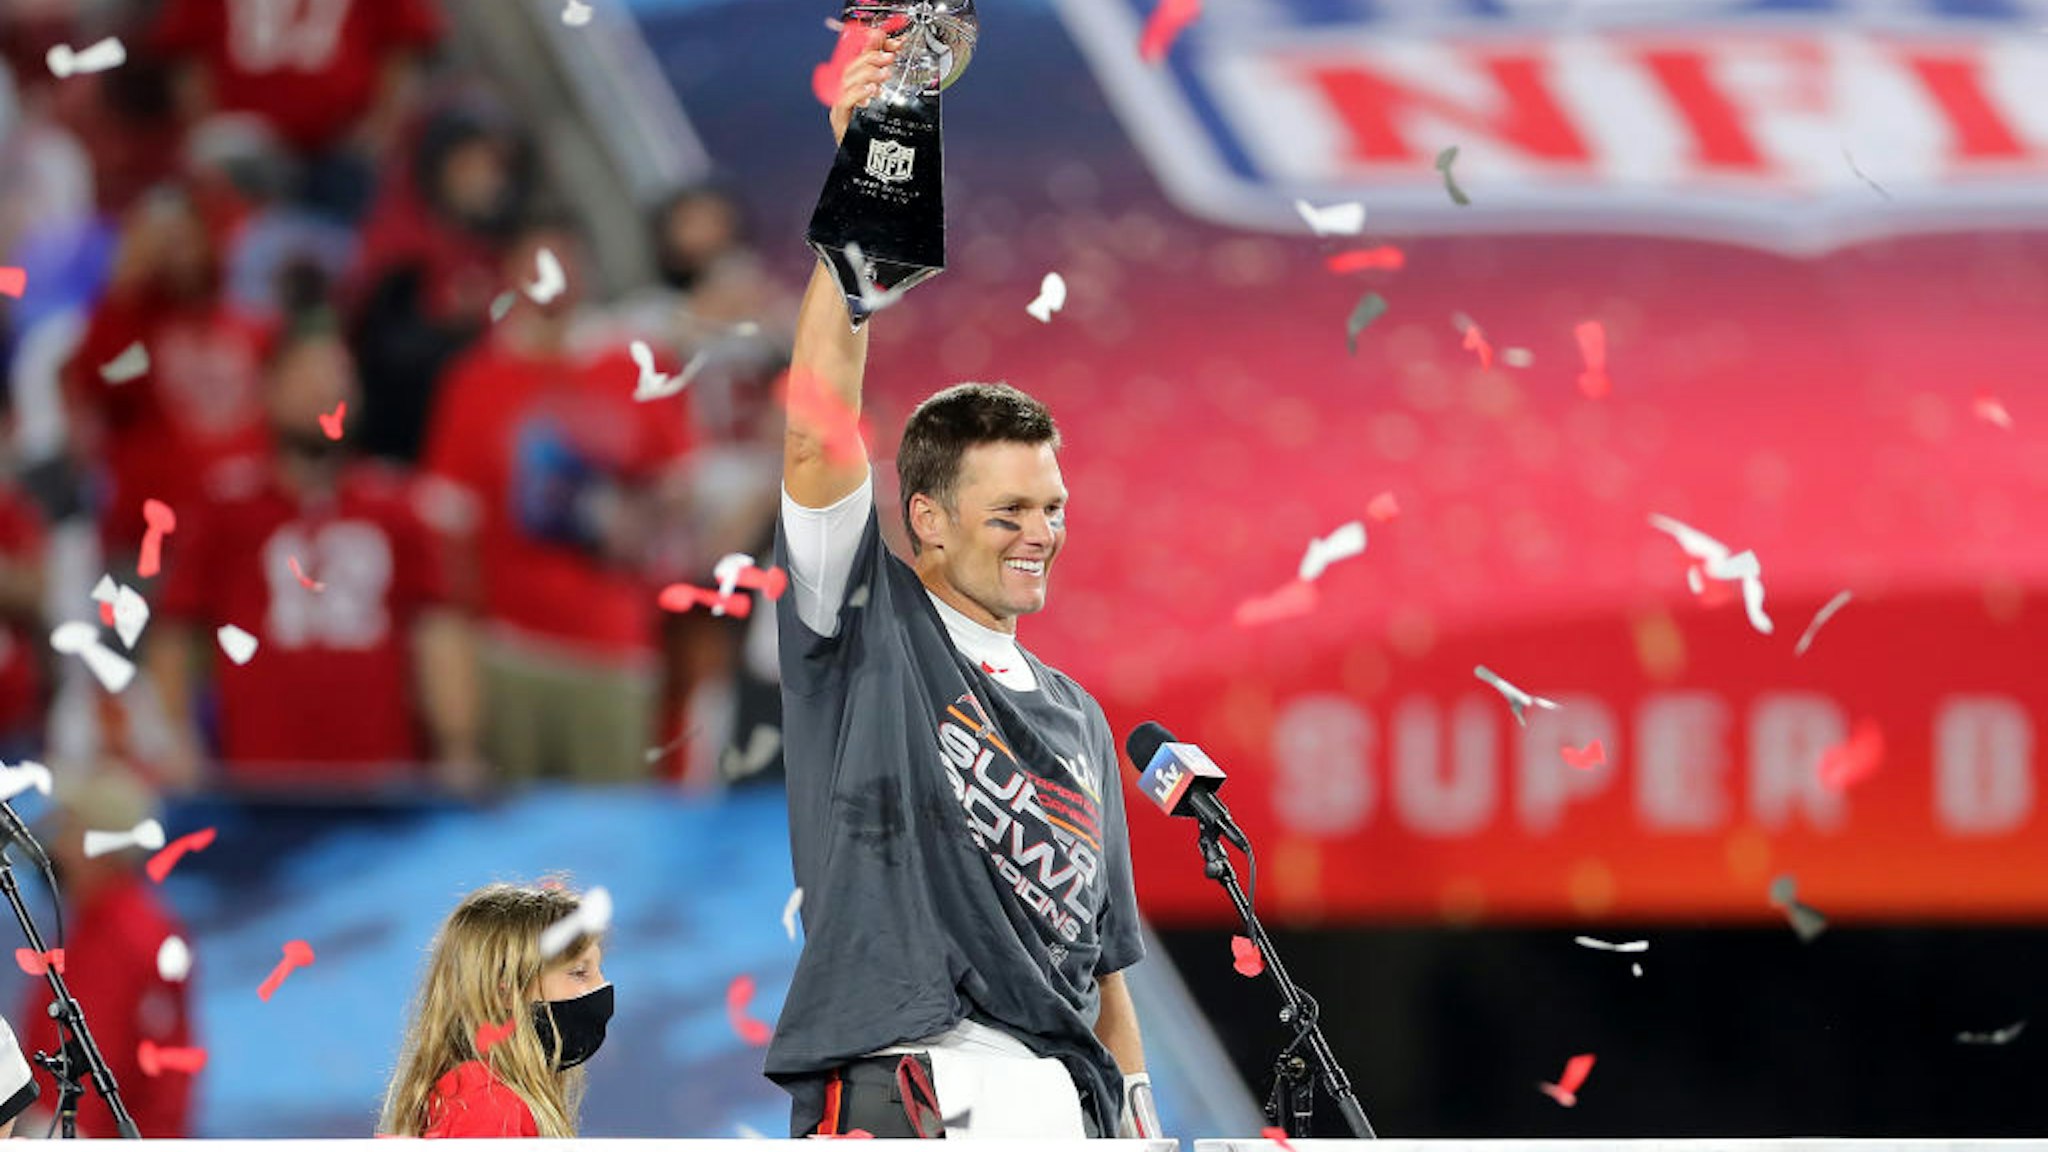 TAMPA, FL - FEBRUARY 07: Super Bowl MVP Tom Brady (12) of the Buccaneers hoists the Lombardi Trophy after the Super Bowl LV game between the Kansas City Chiefs and the Tampa Bay Buccaneers on February 7, 2021 at Raymond James Stadium, in Tampa, FL. (Photo by Cliff Welch/Icon Sportswire via Getty Images)